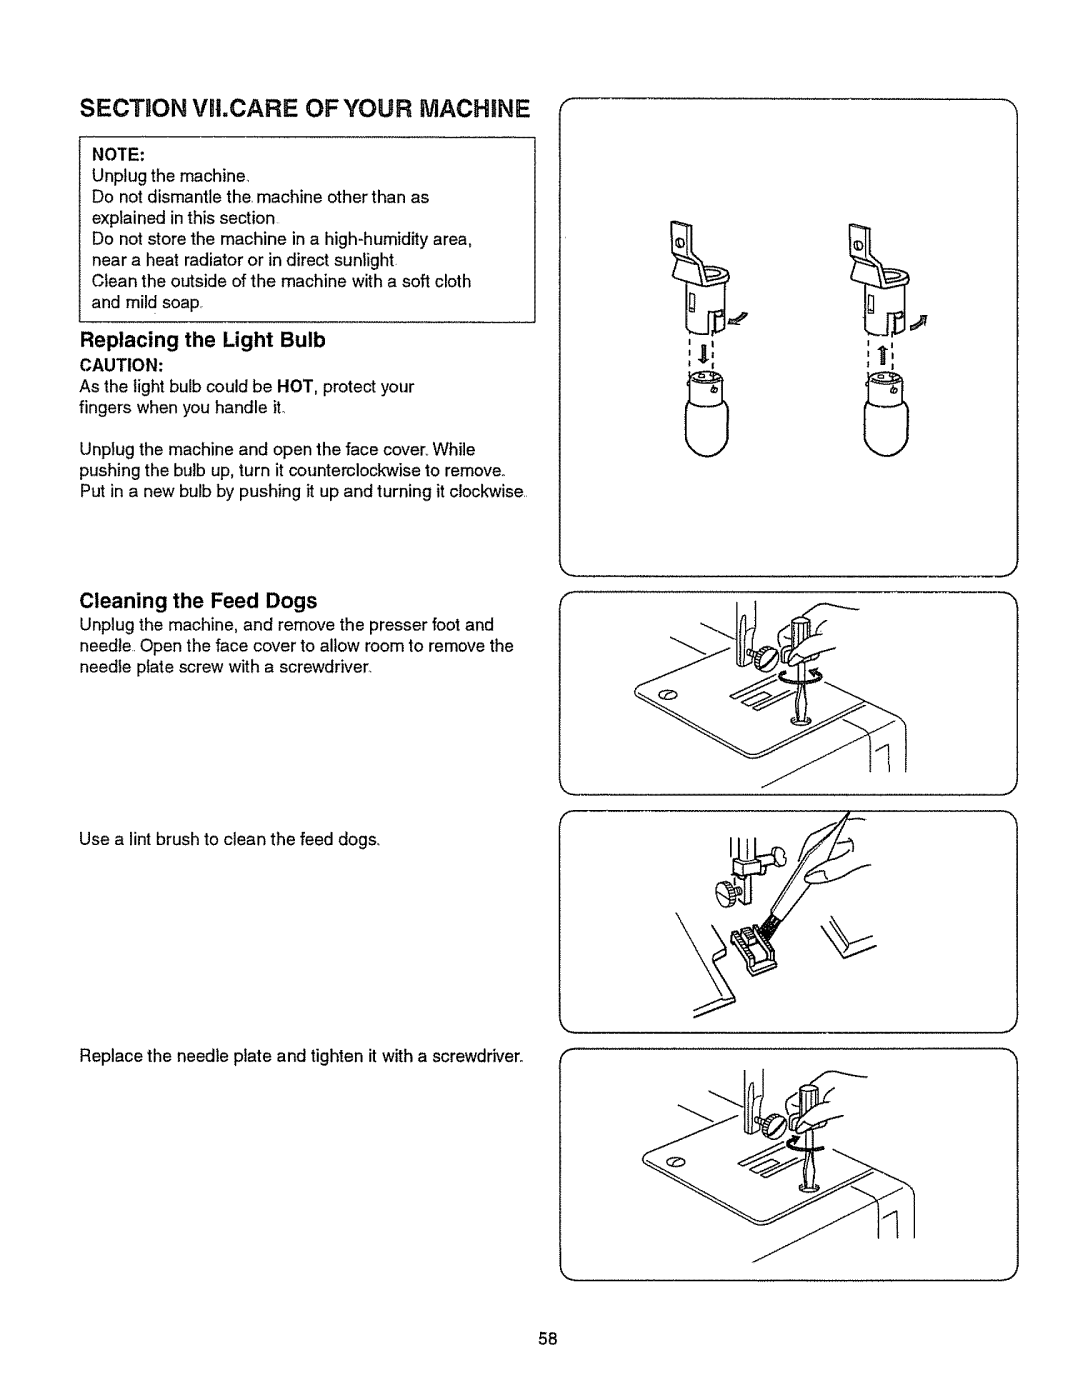 Kenmore 385.151082 owner manual Section VI.CARE of Your Machine, Replacing the Light Bulb 